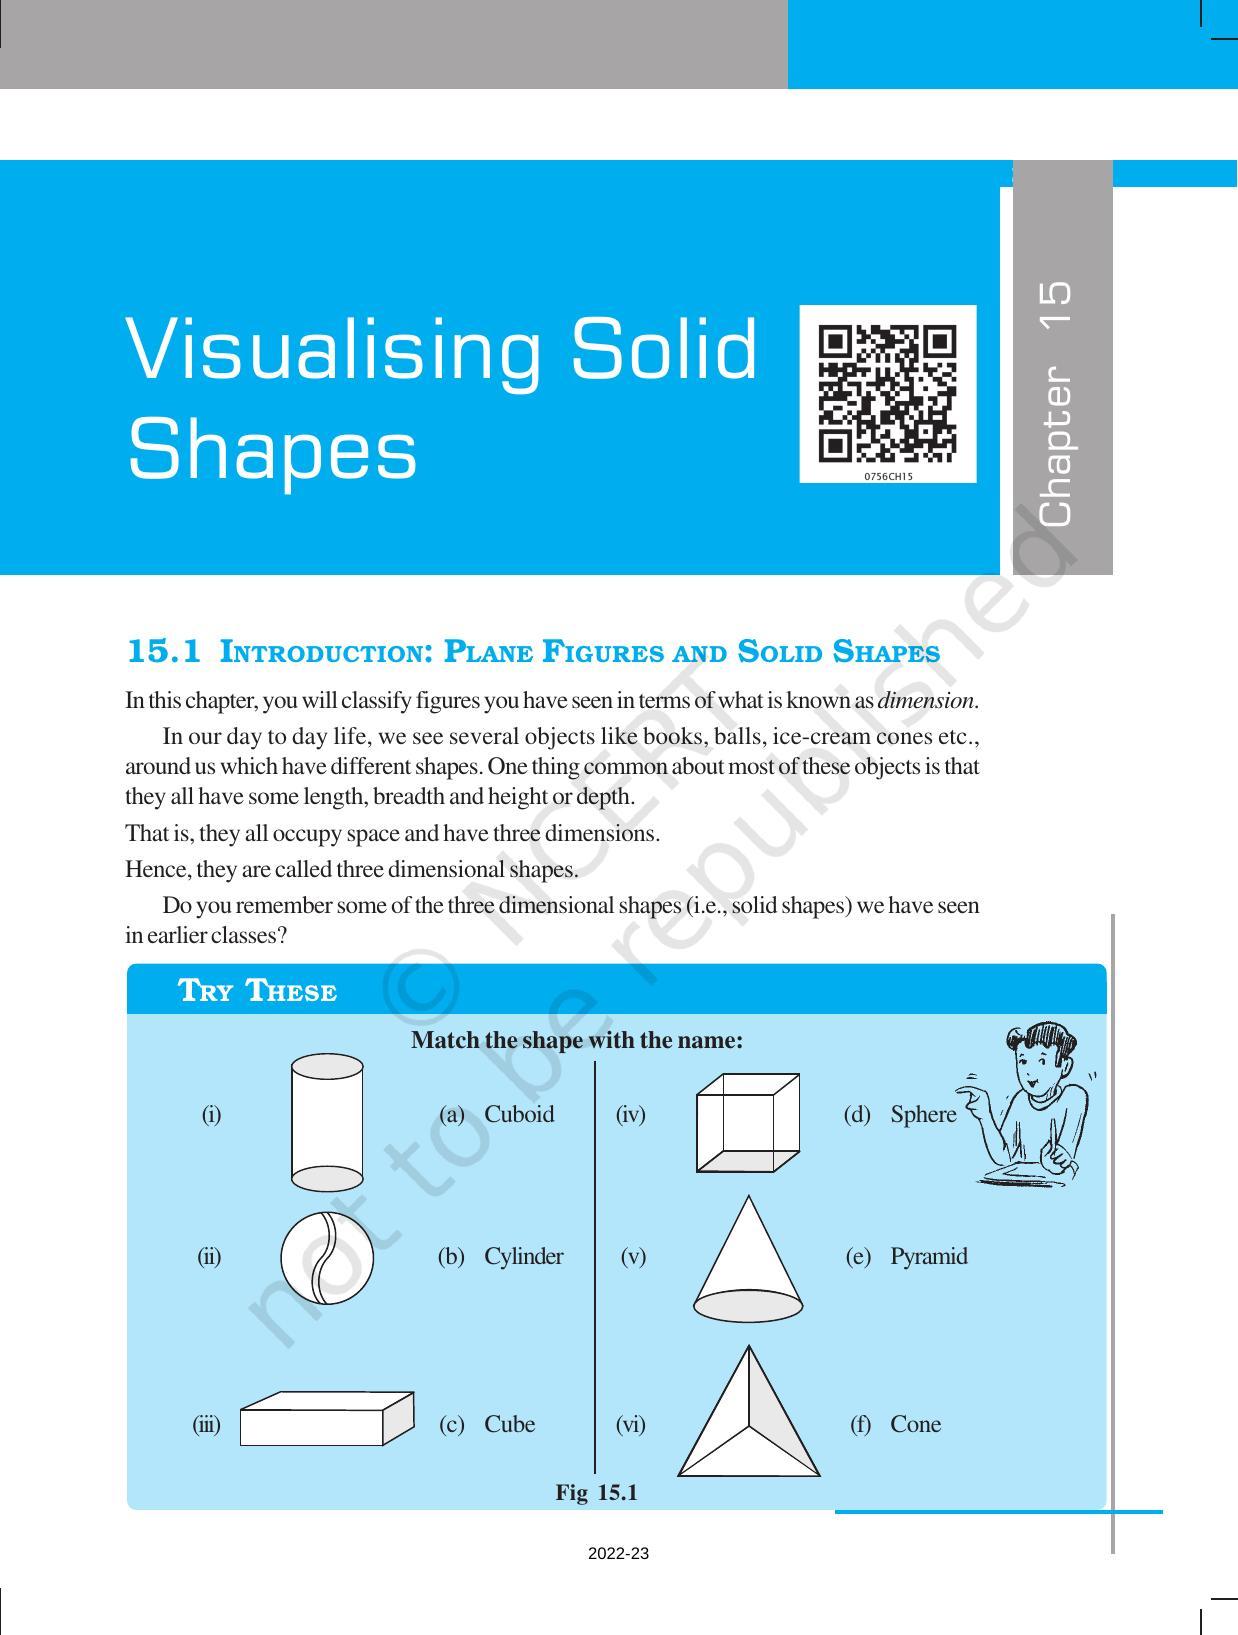 NCERT Book for Class 7 Maths: Chapter 15-Visualising Solid Shapes - Page 1